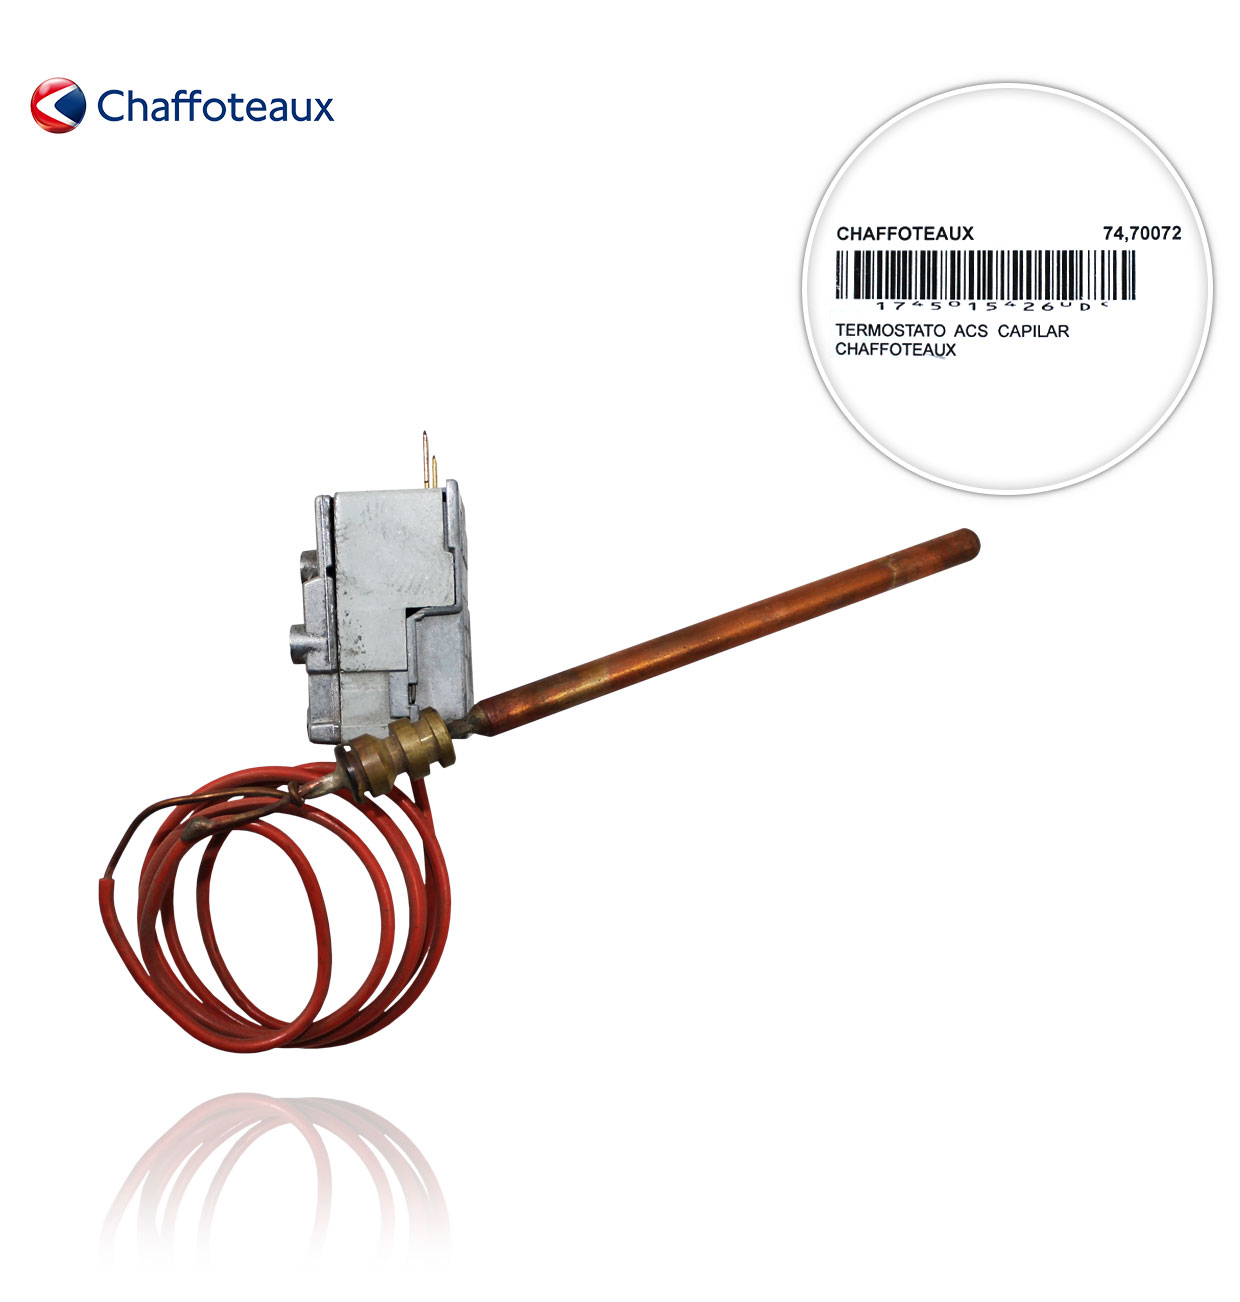 CHAFFOTEAUX CAPILLARY DHW THERMOSTAT